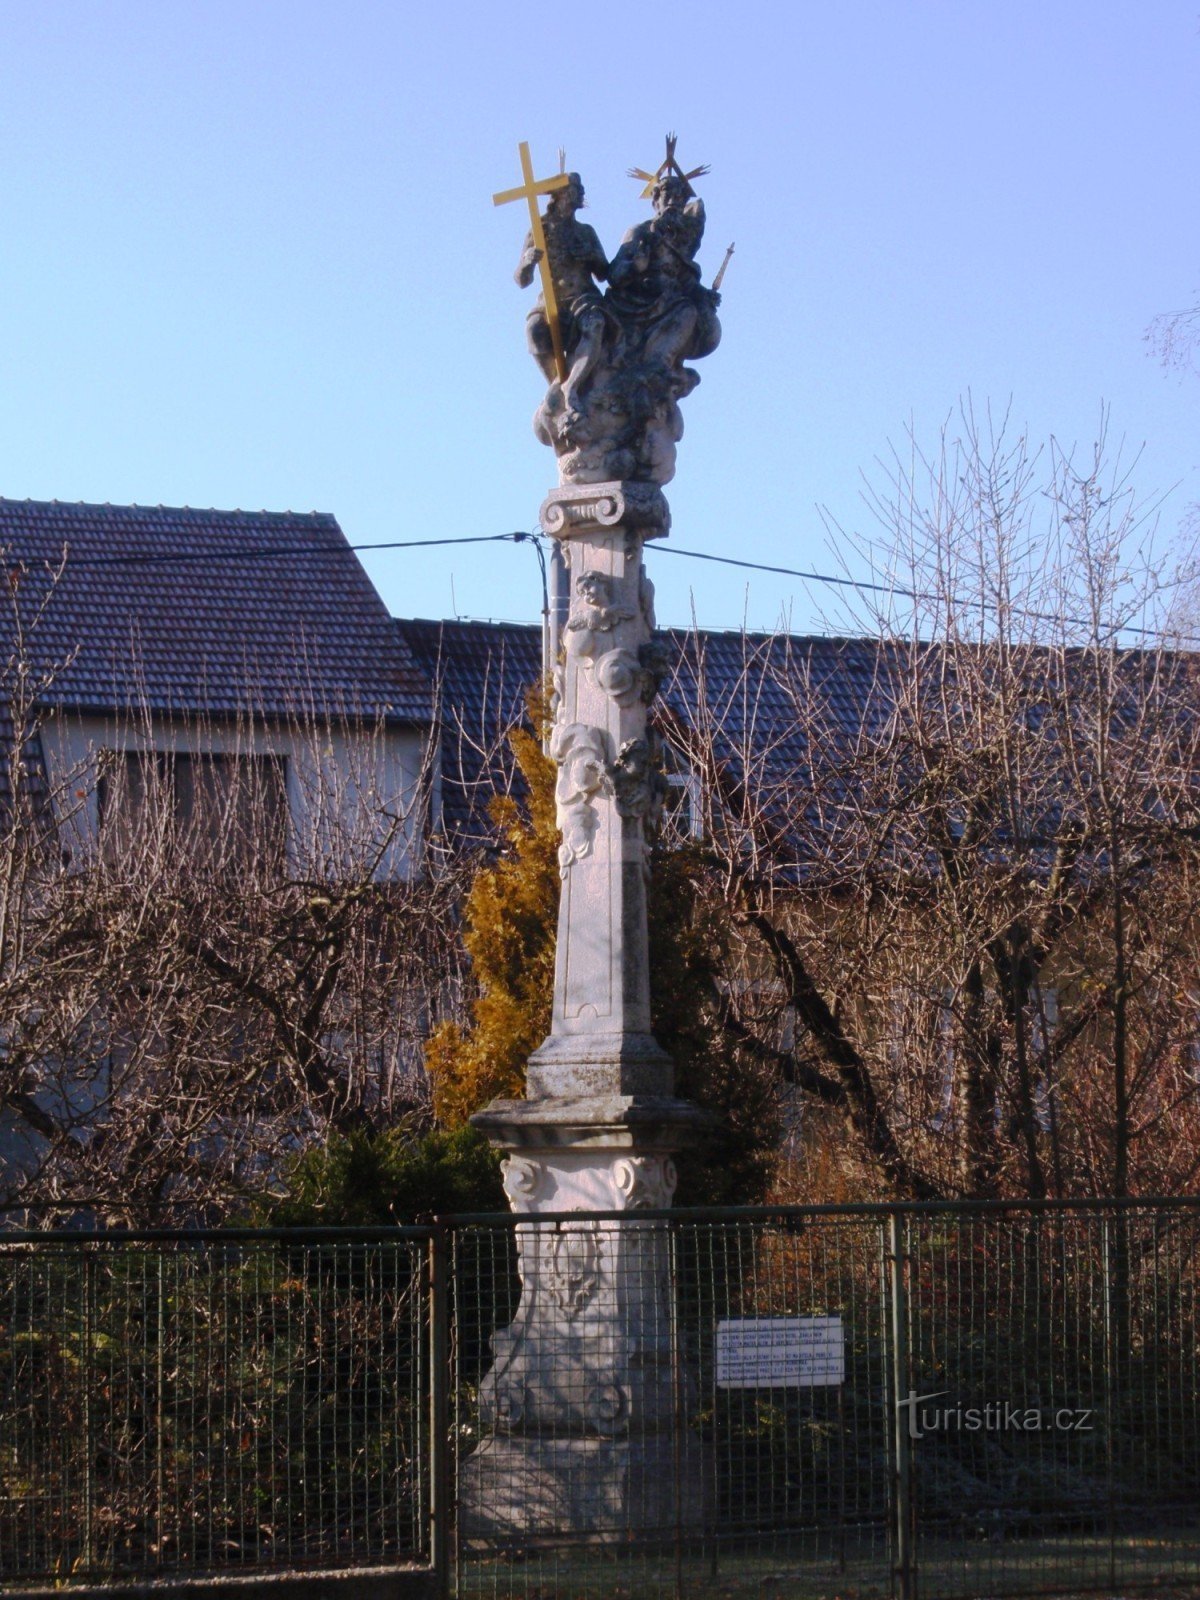 The statue of the Holy Trinity in Troubsk